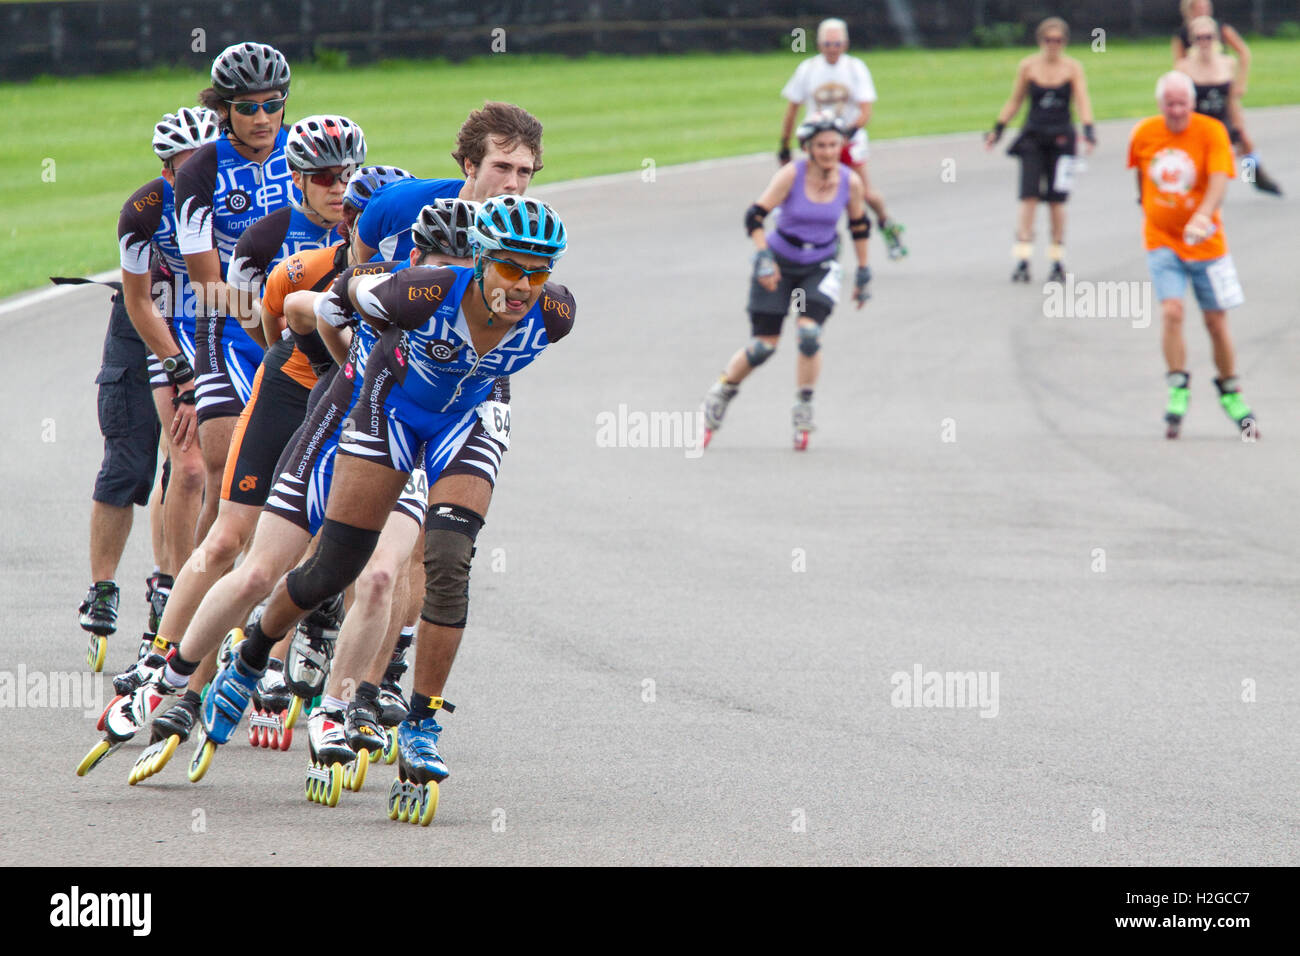 Inline Skating Marathon High Resolution Stock Photography and Images - Alamy